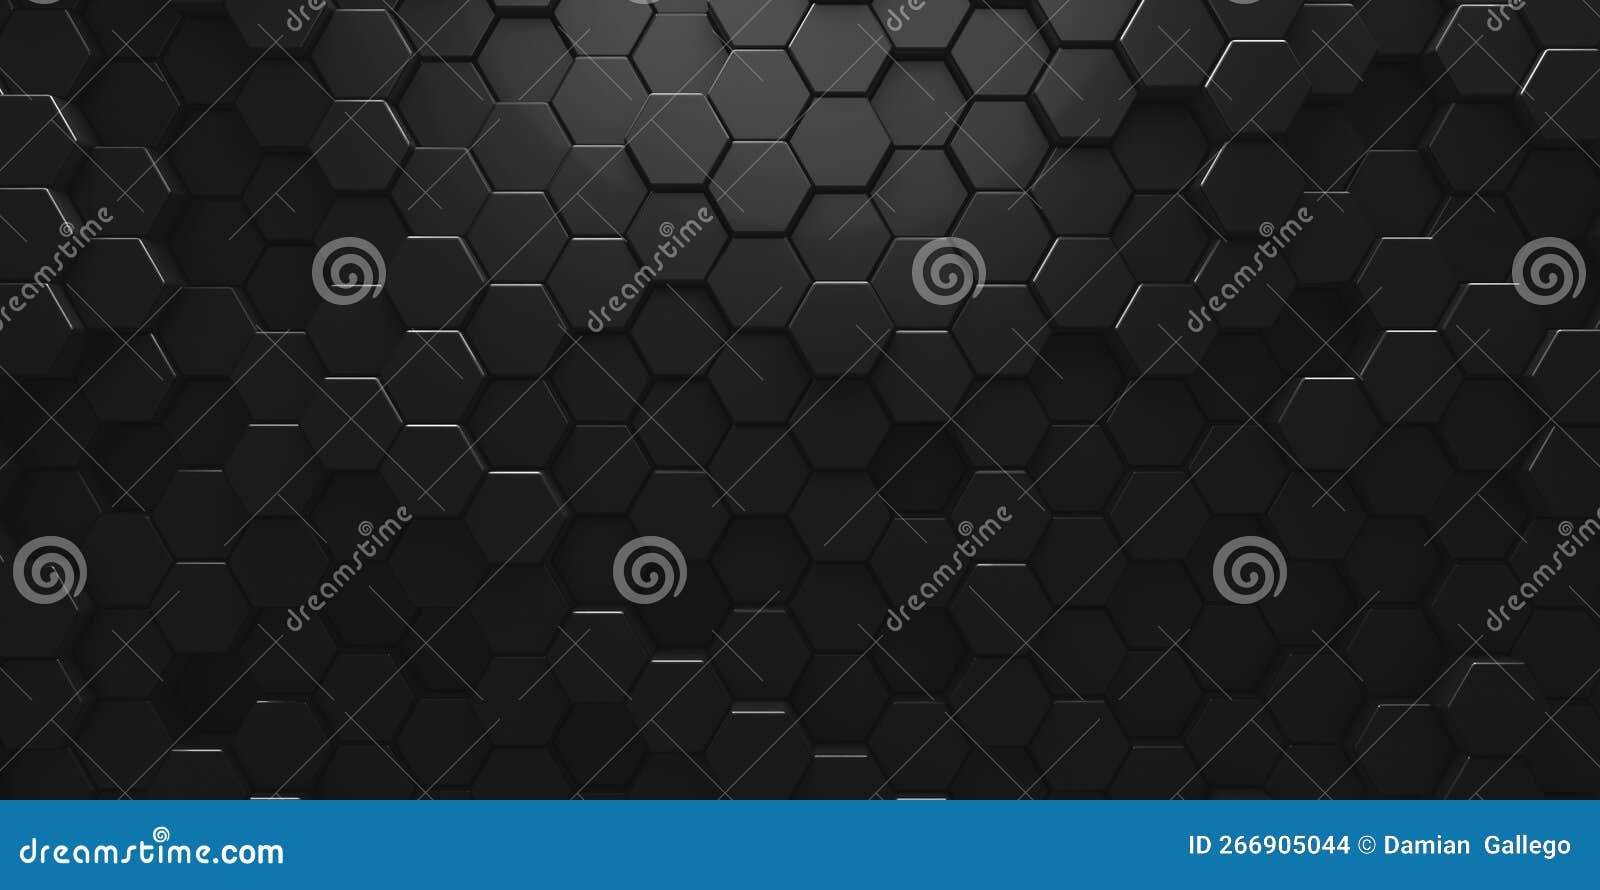 black geometric hexagonal abstract background. surface polygonal pattern with glowing hexagons 3d 